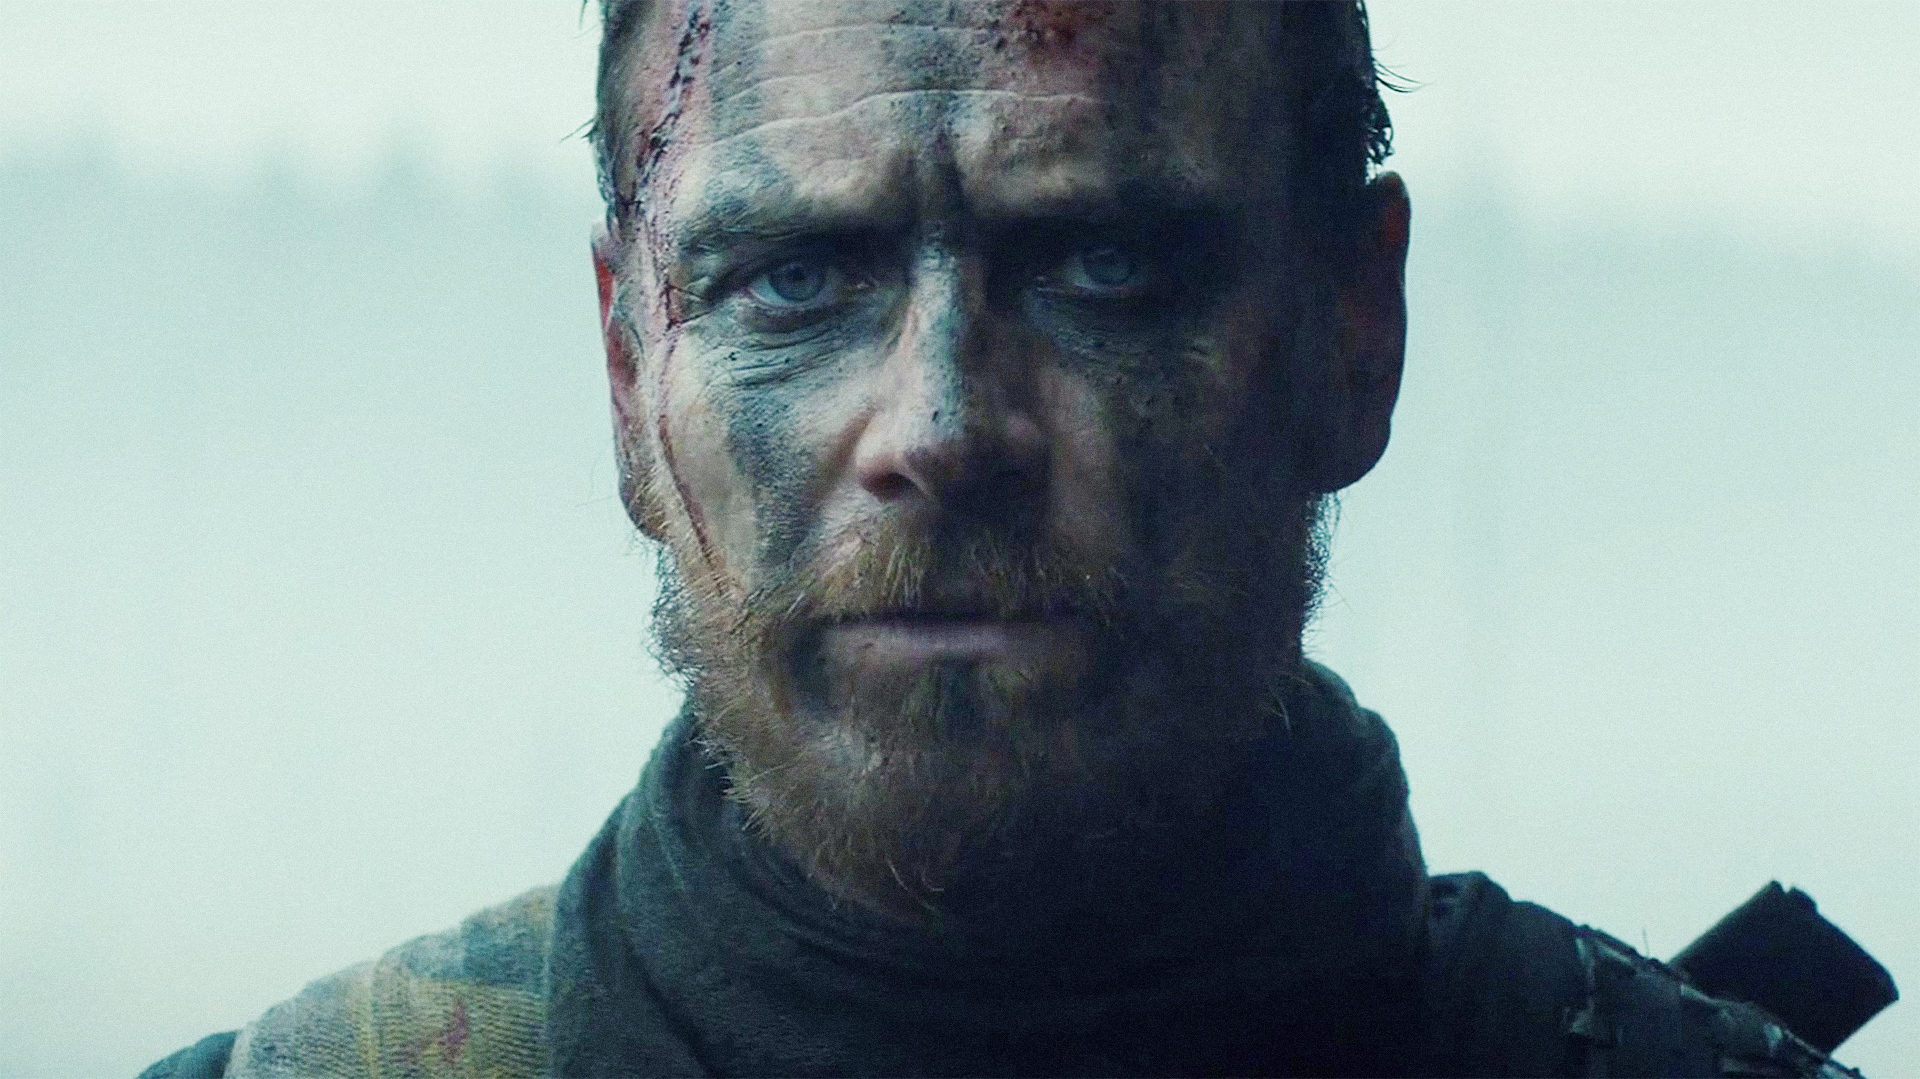 http://f.fastcompany.net/multisite_files/fastcompany/poster/2015/06/3047075-poster-p-1-watch-the-trailer-for-the-epic-sword-swinging-adaptation-of-macbeth-starring-michael-fassben.jpg